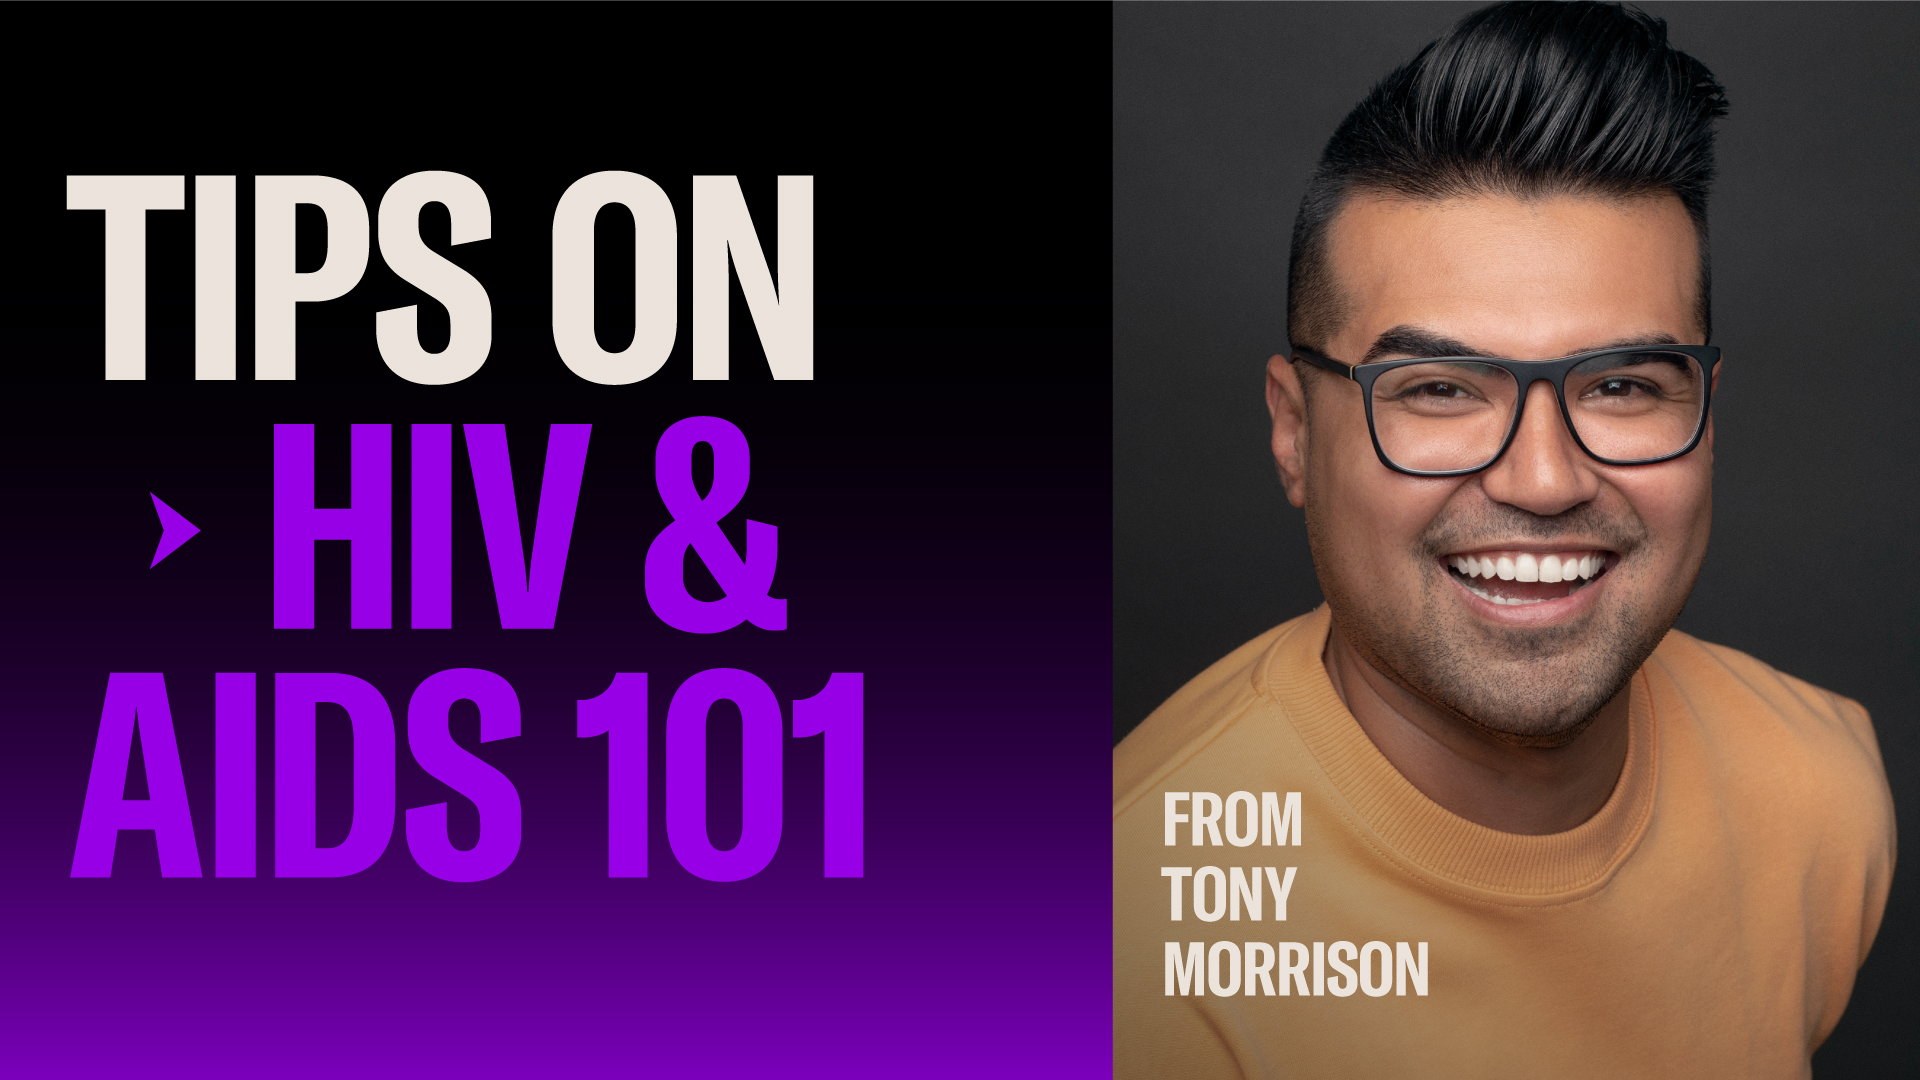 TIPS ON HIV & AIDS 101 FROM TONY MORRISON  Tony Morrison is an Emmy and GLAAD Award-earning journalist and creator. As GLAAD’s Senior Director of Communications, he amplifies LGBTQ stories and brings truth to experiences like his for people living with undetectable HIV.